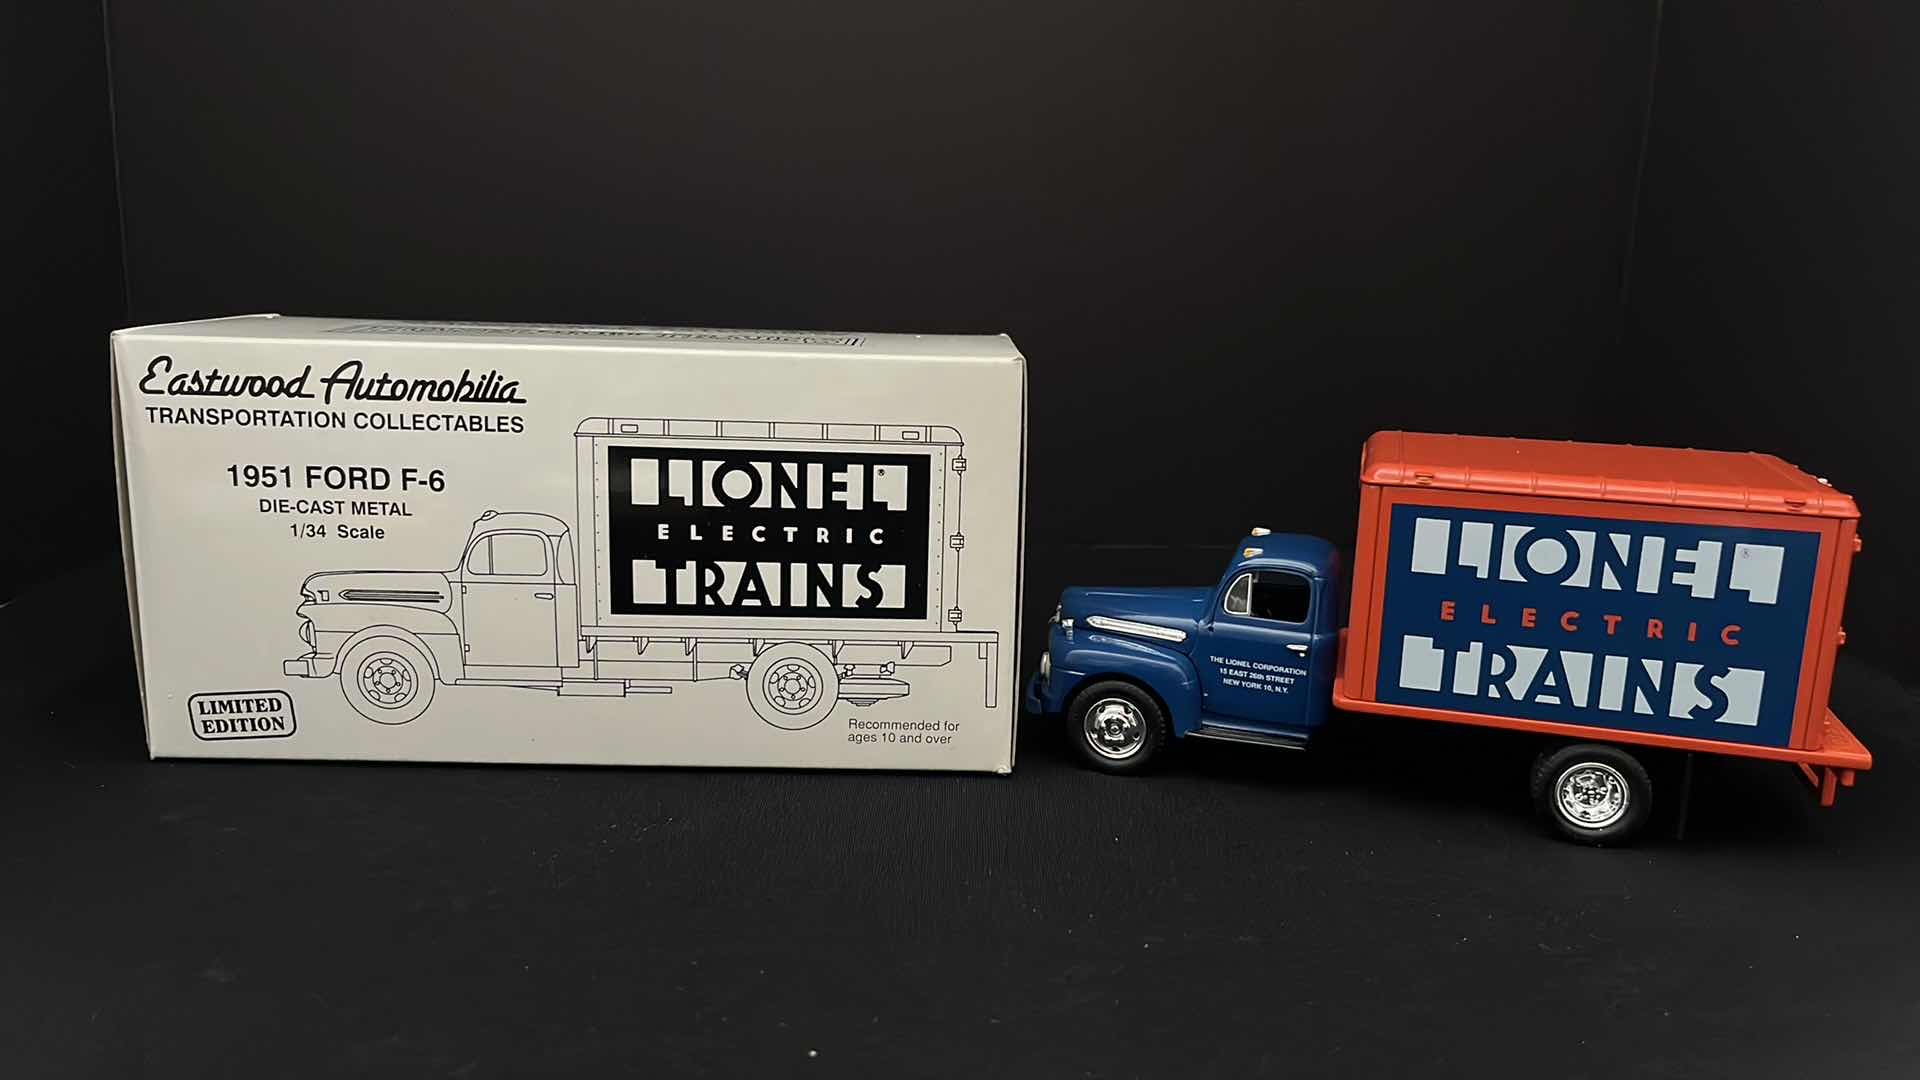 Photo 6 of FIRST GEAR INC, EASTWOOD AUTOMOBILIA TRANSPORTATION COLLECTIBLES LIONEL ELECTRIC TRAINS 1951 FORD F-6 STOCK NO 19-0104